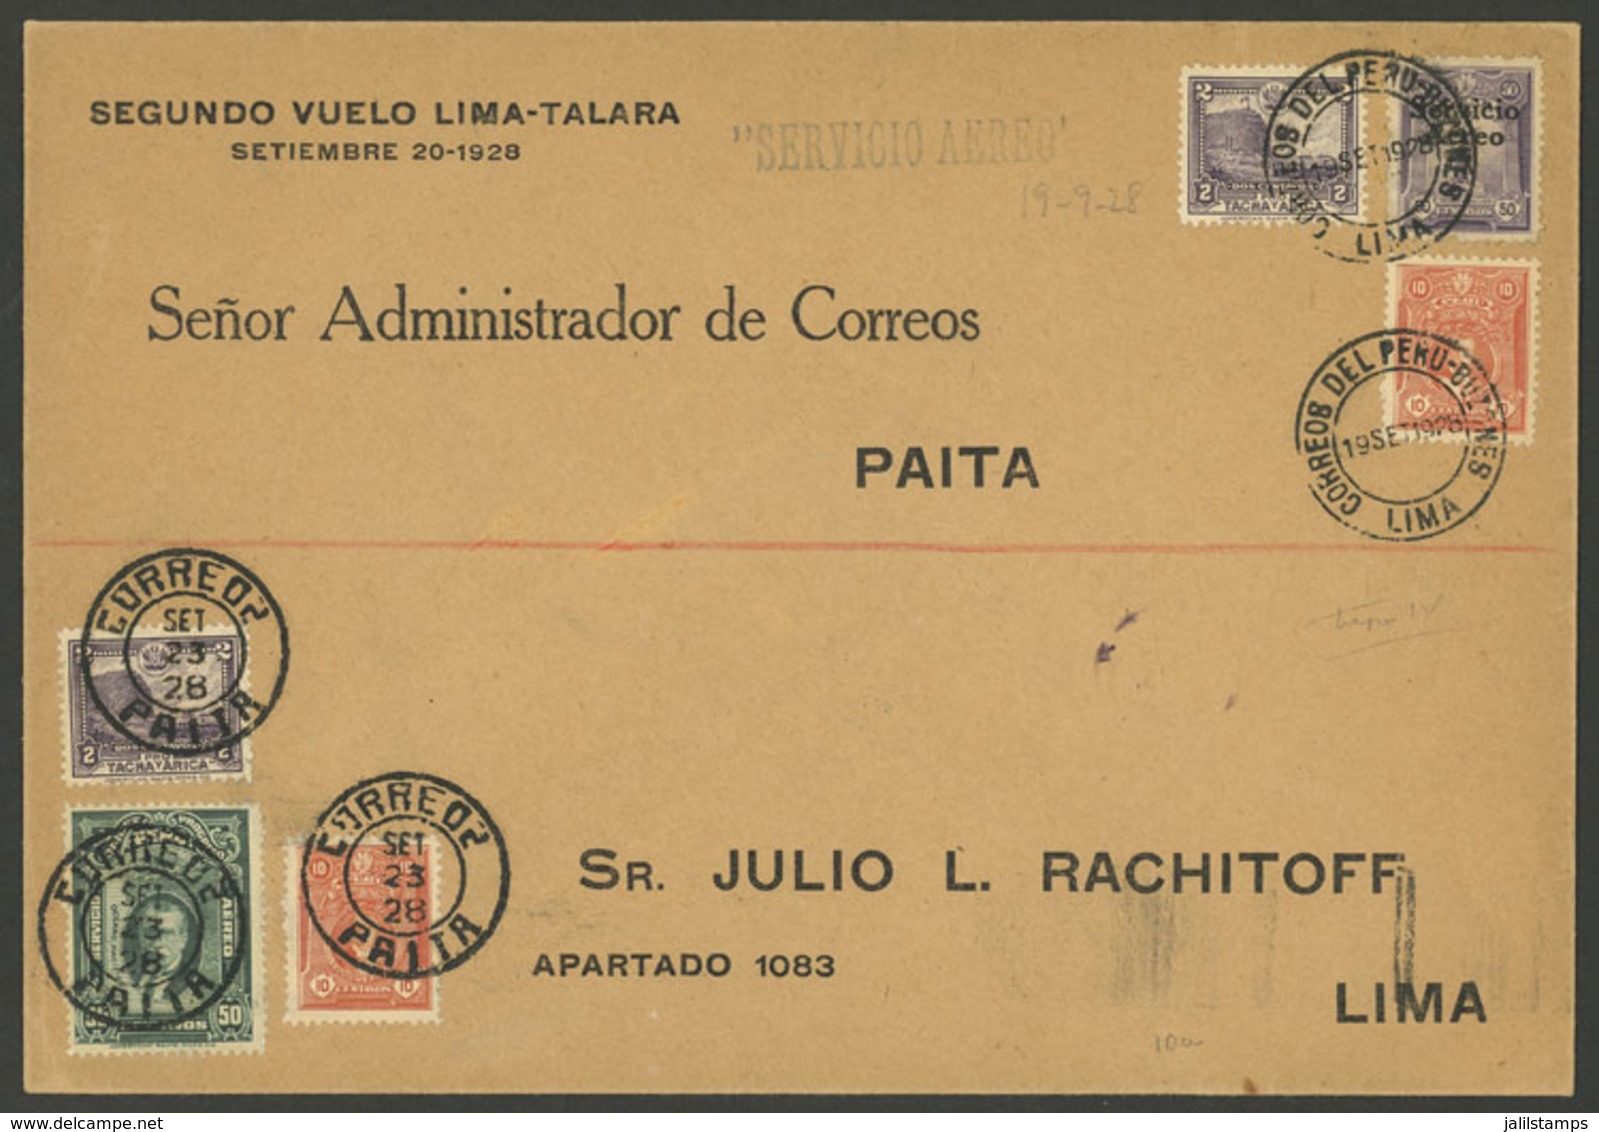 PERU: 19/SE/1928 Second Flight Lima - Paita - Lima, Cover With Double Postage To Pay The Rating Of Both Flights, Using S - Perú